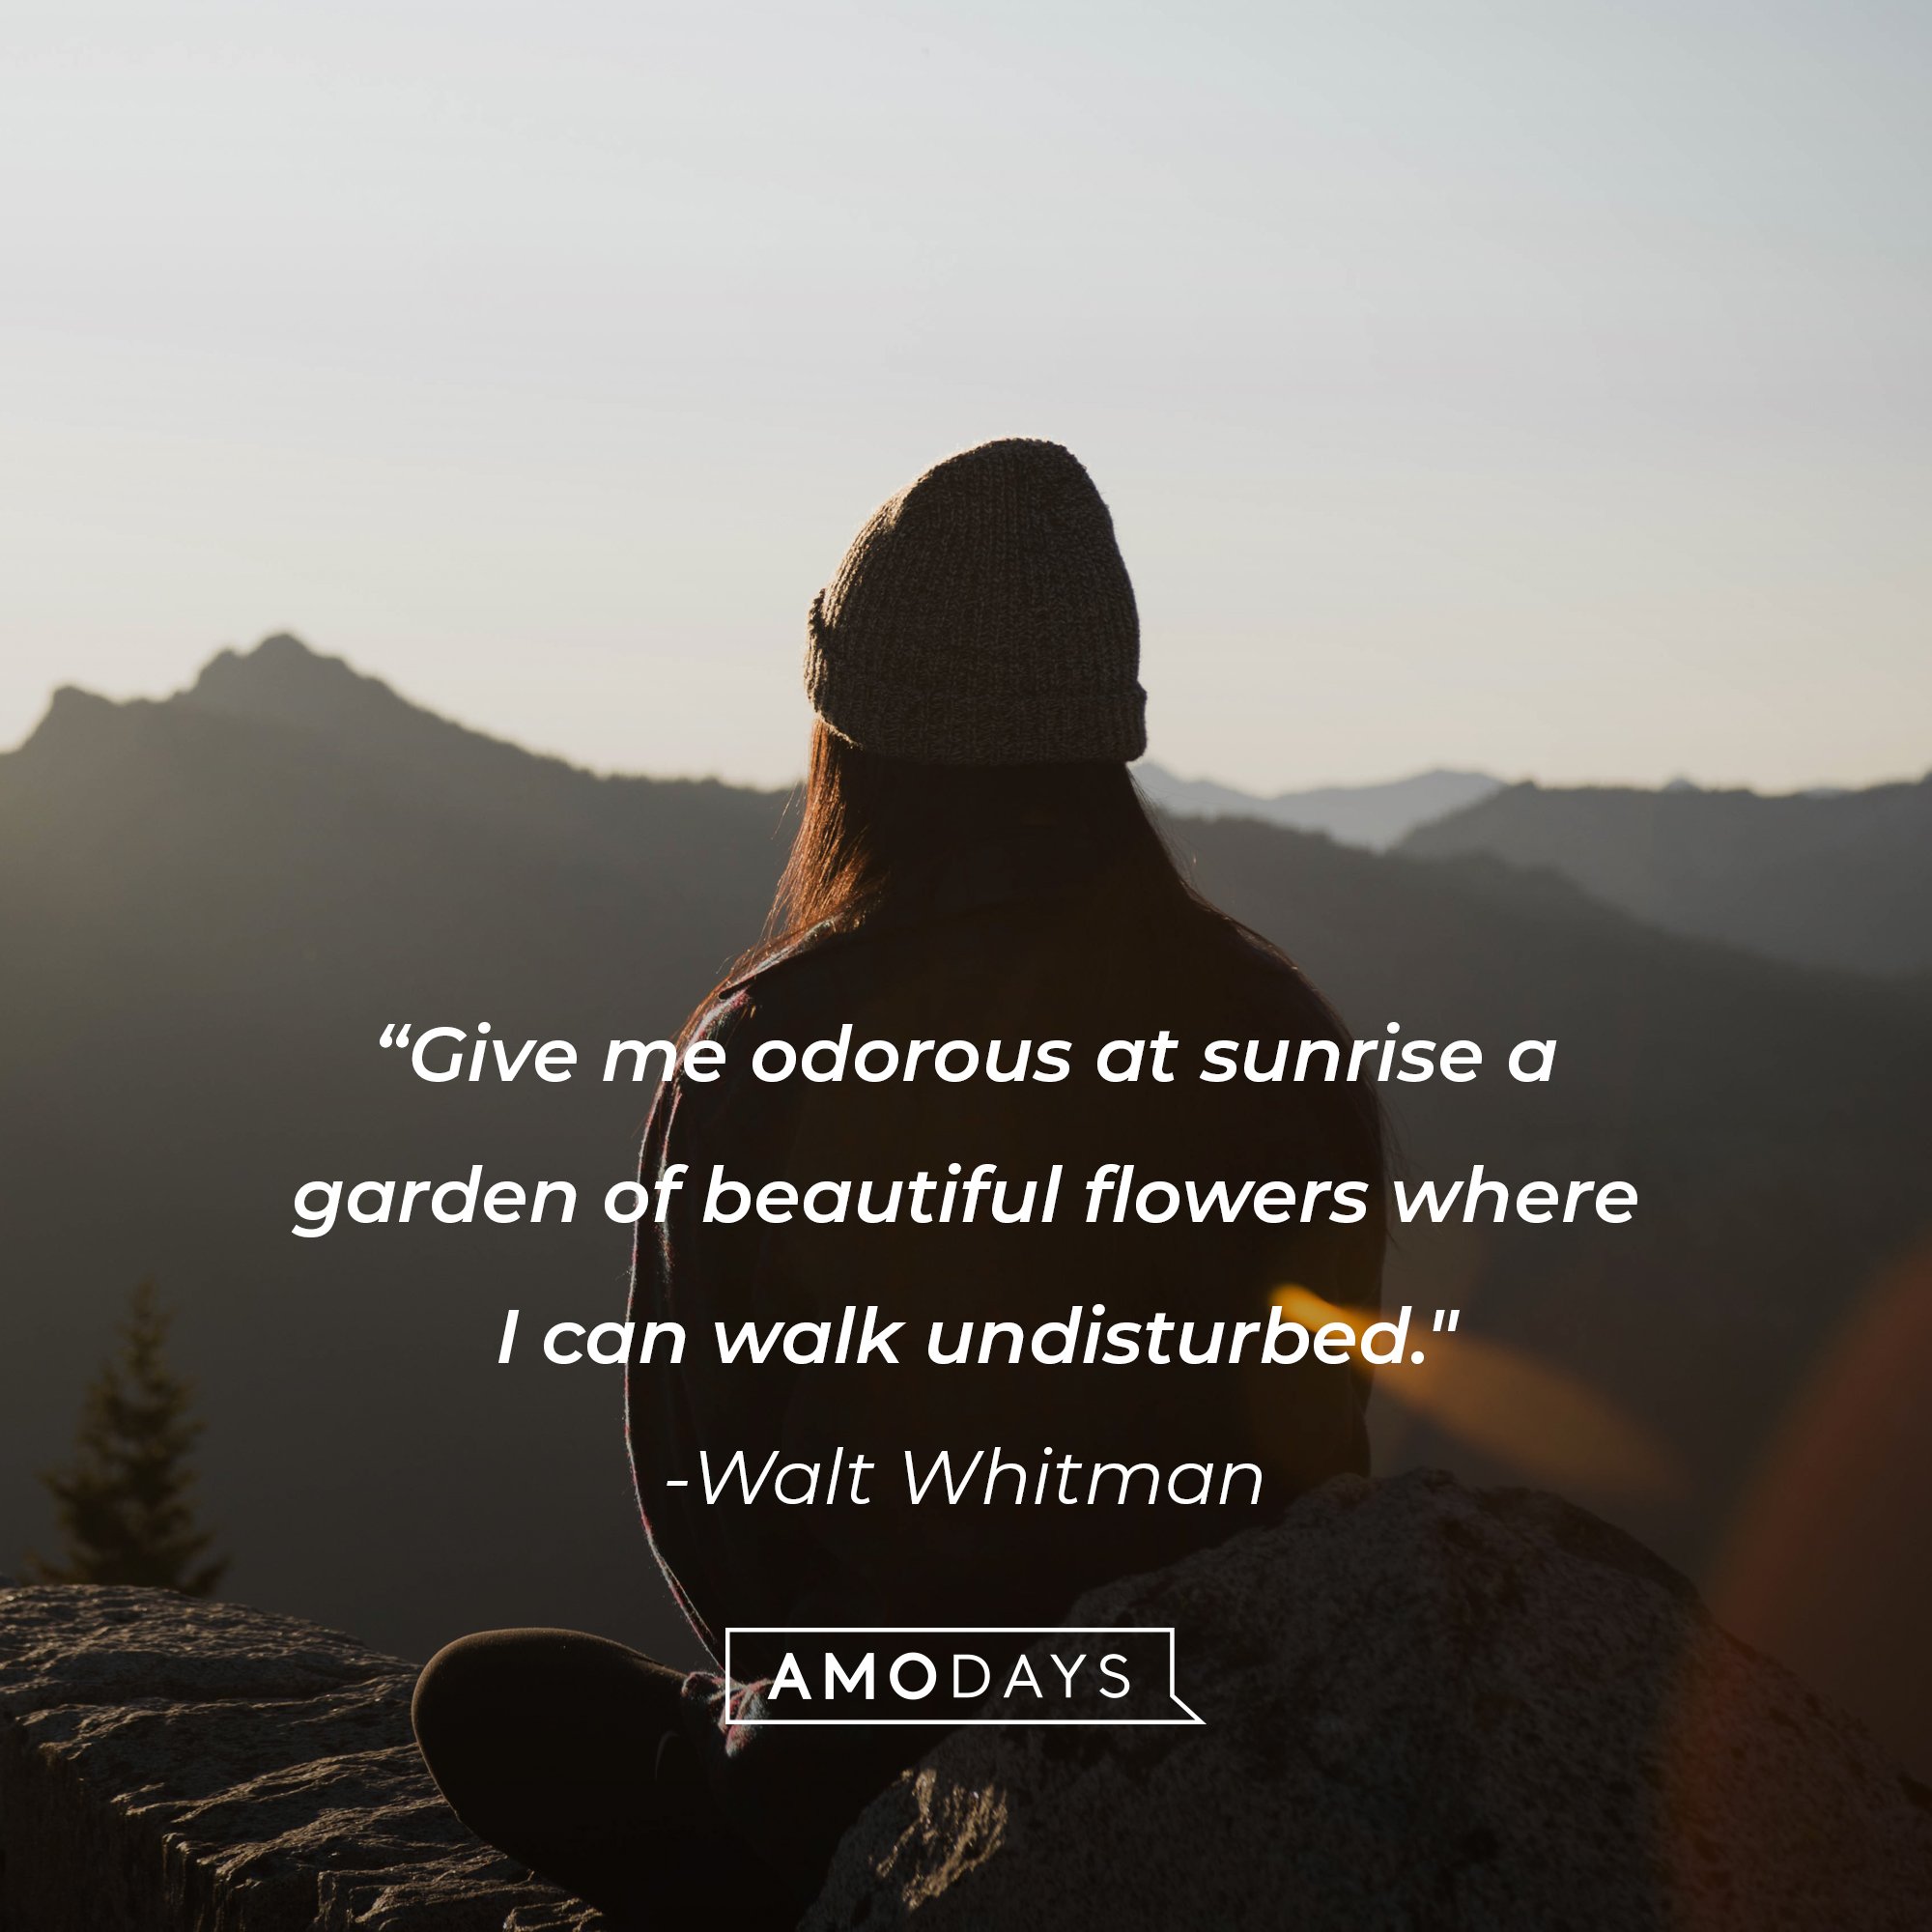  Walt Whitman’s quote: "Give me odorous at sunrise a garden of beautiful flowers where I can walk undisturbed." | Image: AmoDays